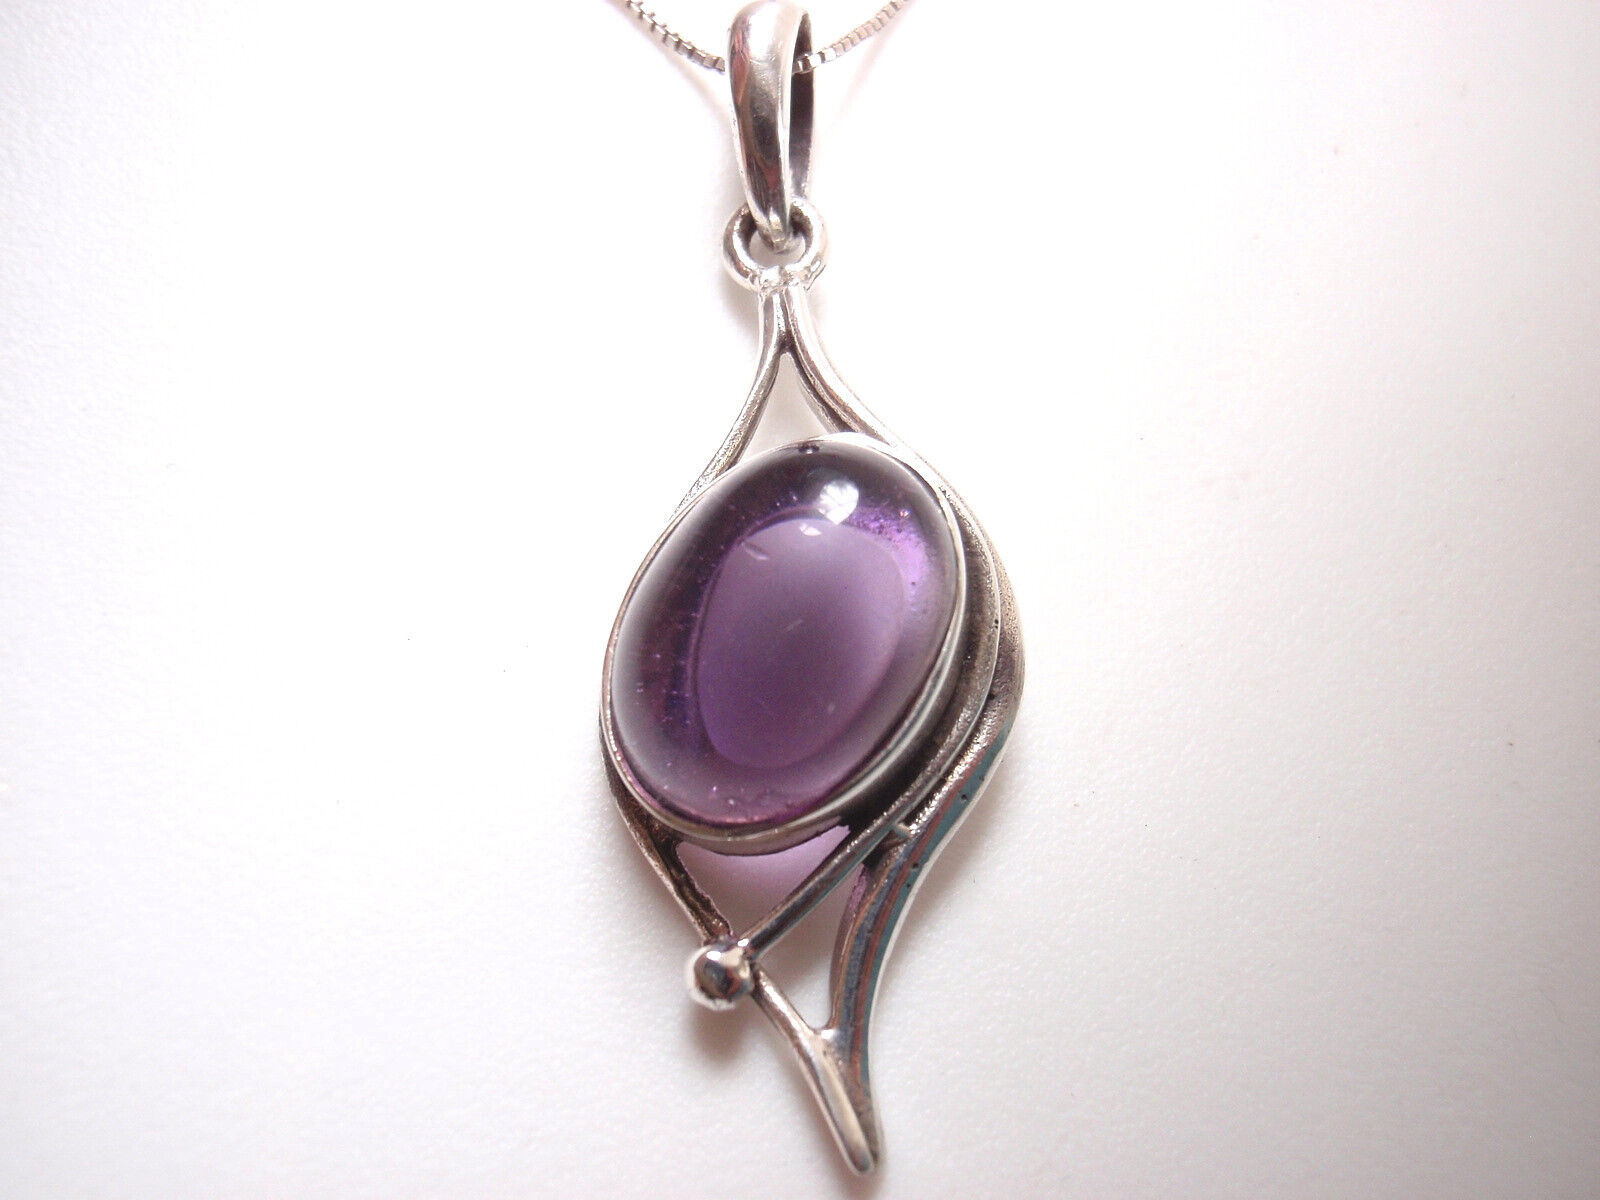 Simulated Amethyst Framed in Curves 925 Sterling Silver Necklace - $18.89